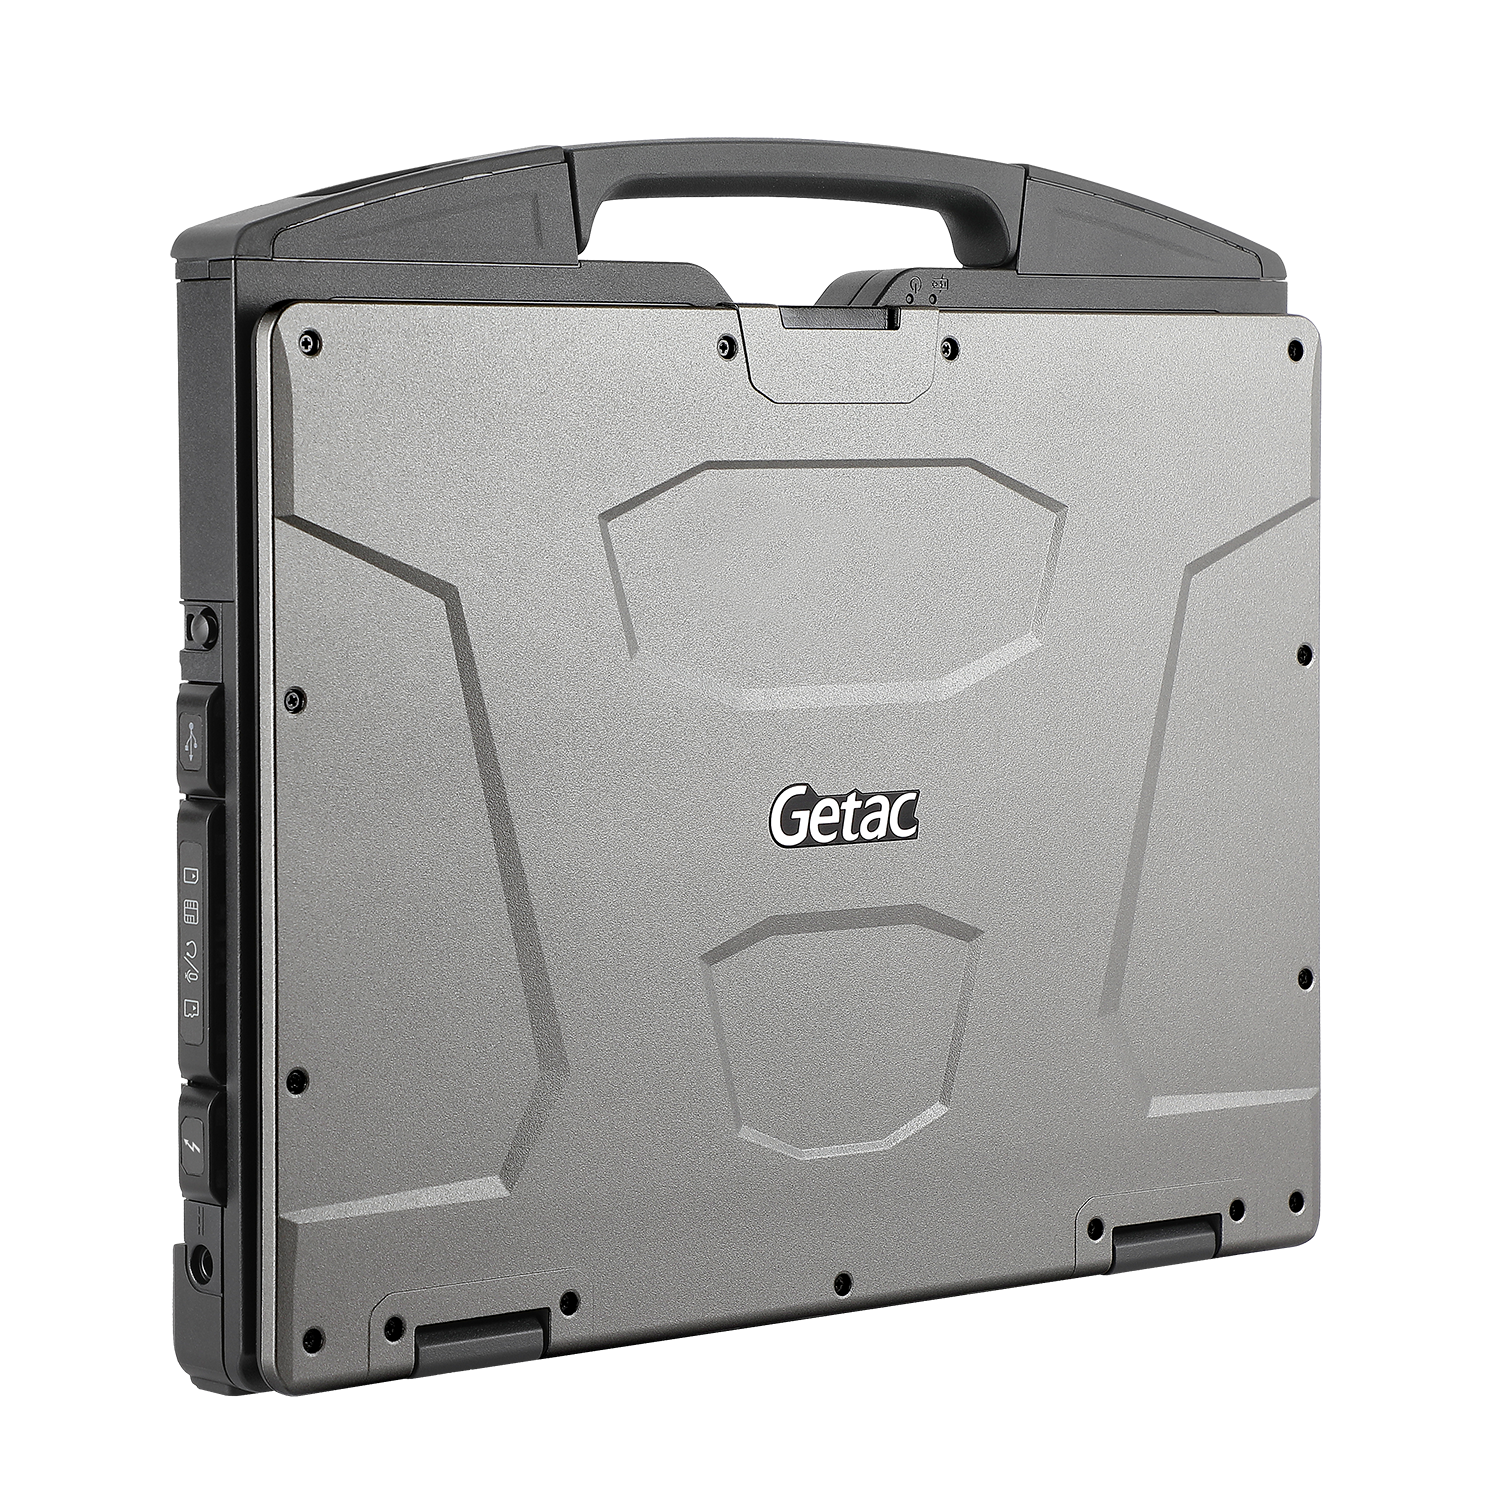 S410 getac g4 model rugged carry case on white background